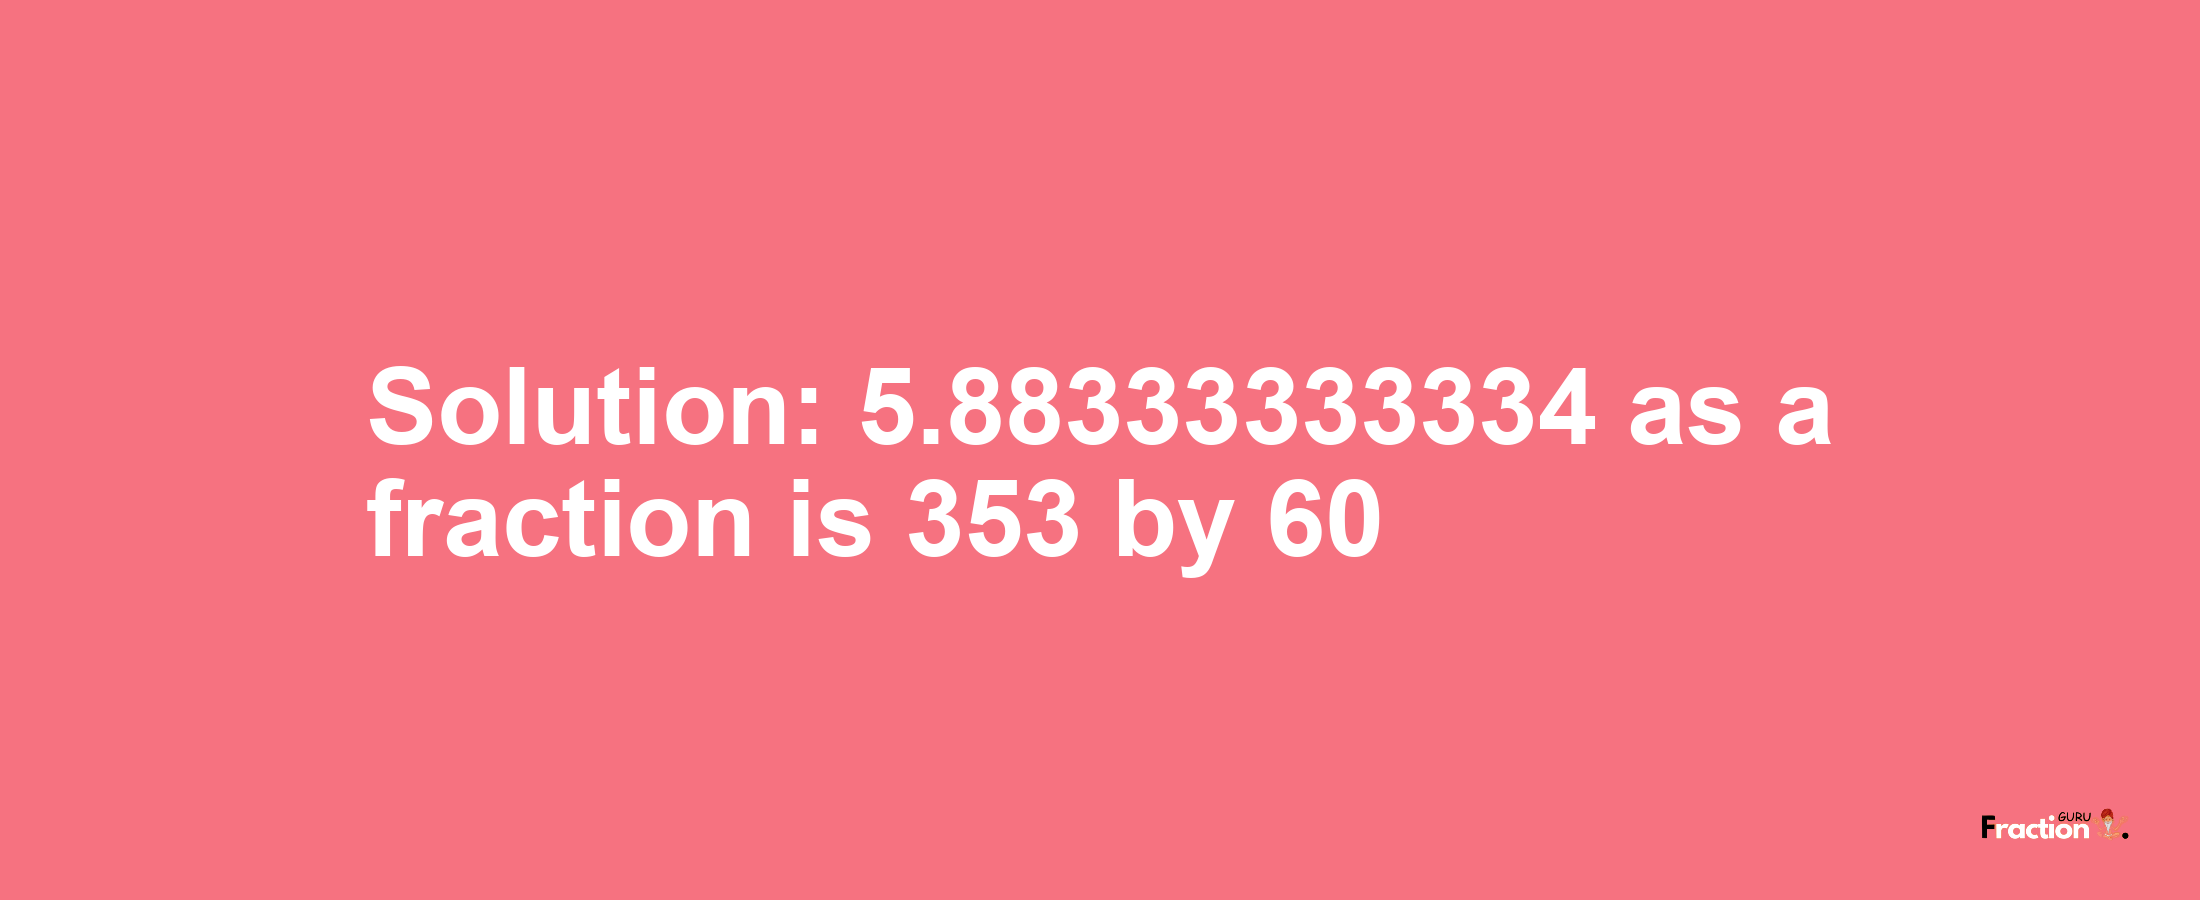 Solution:5.88333333334 as a fraction is 353/60